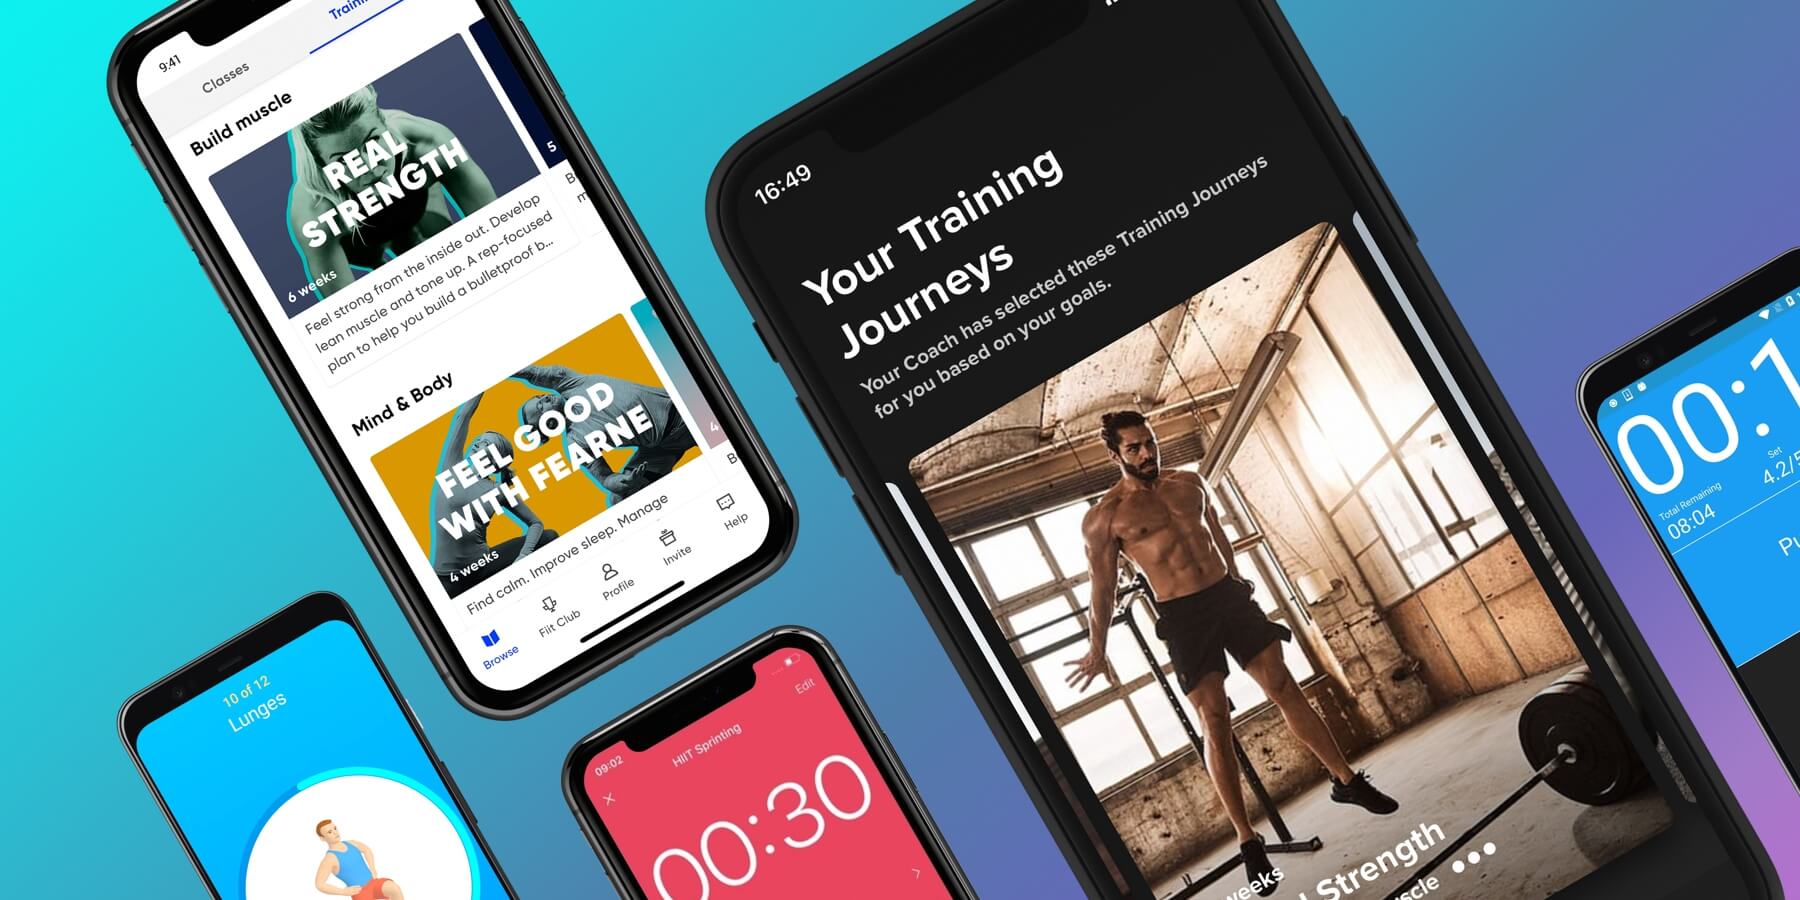 Best high-intensity interval training workout apps